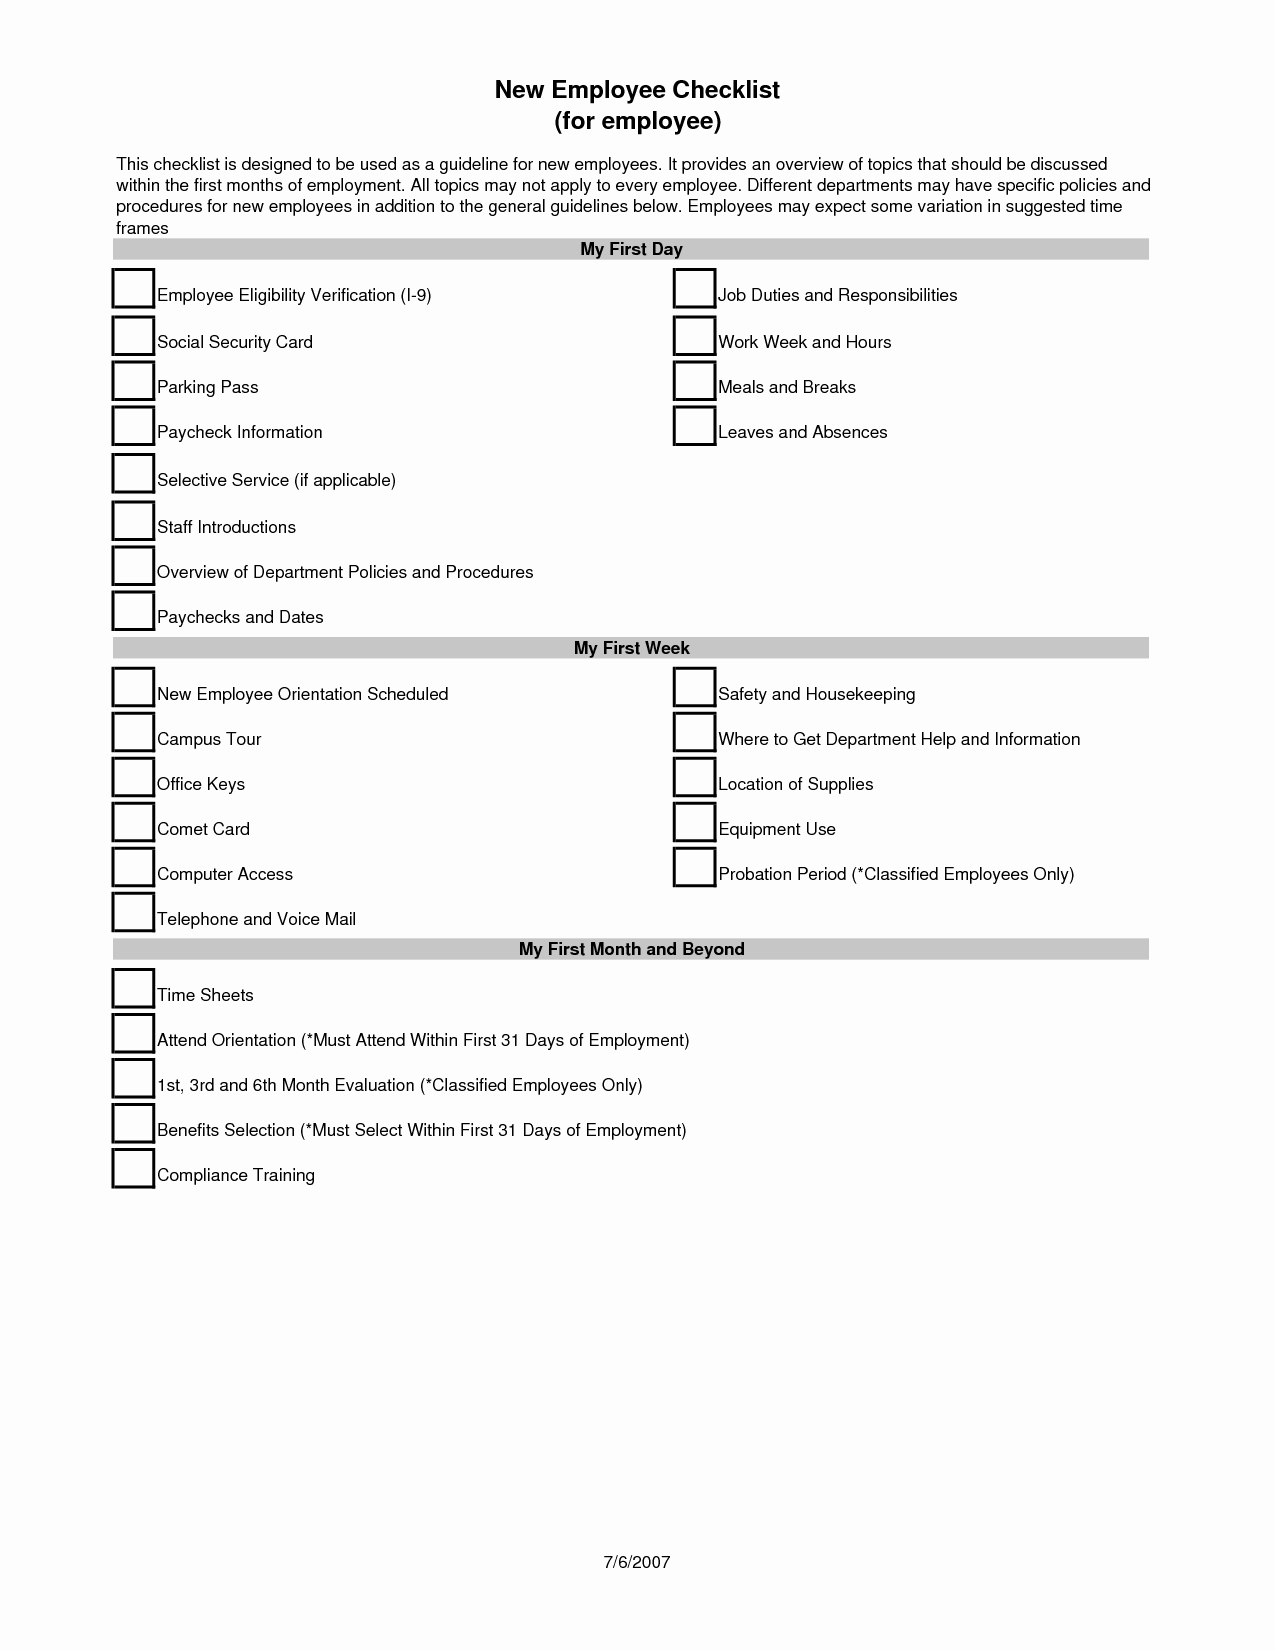 Downloadable New Employee Checklist Template and form